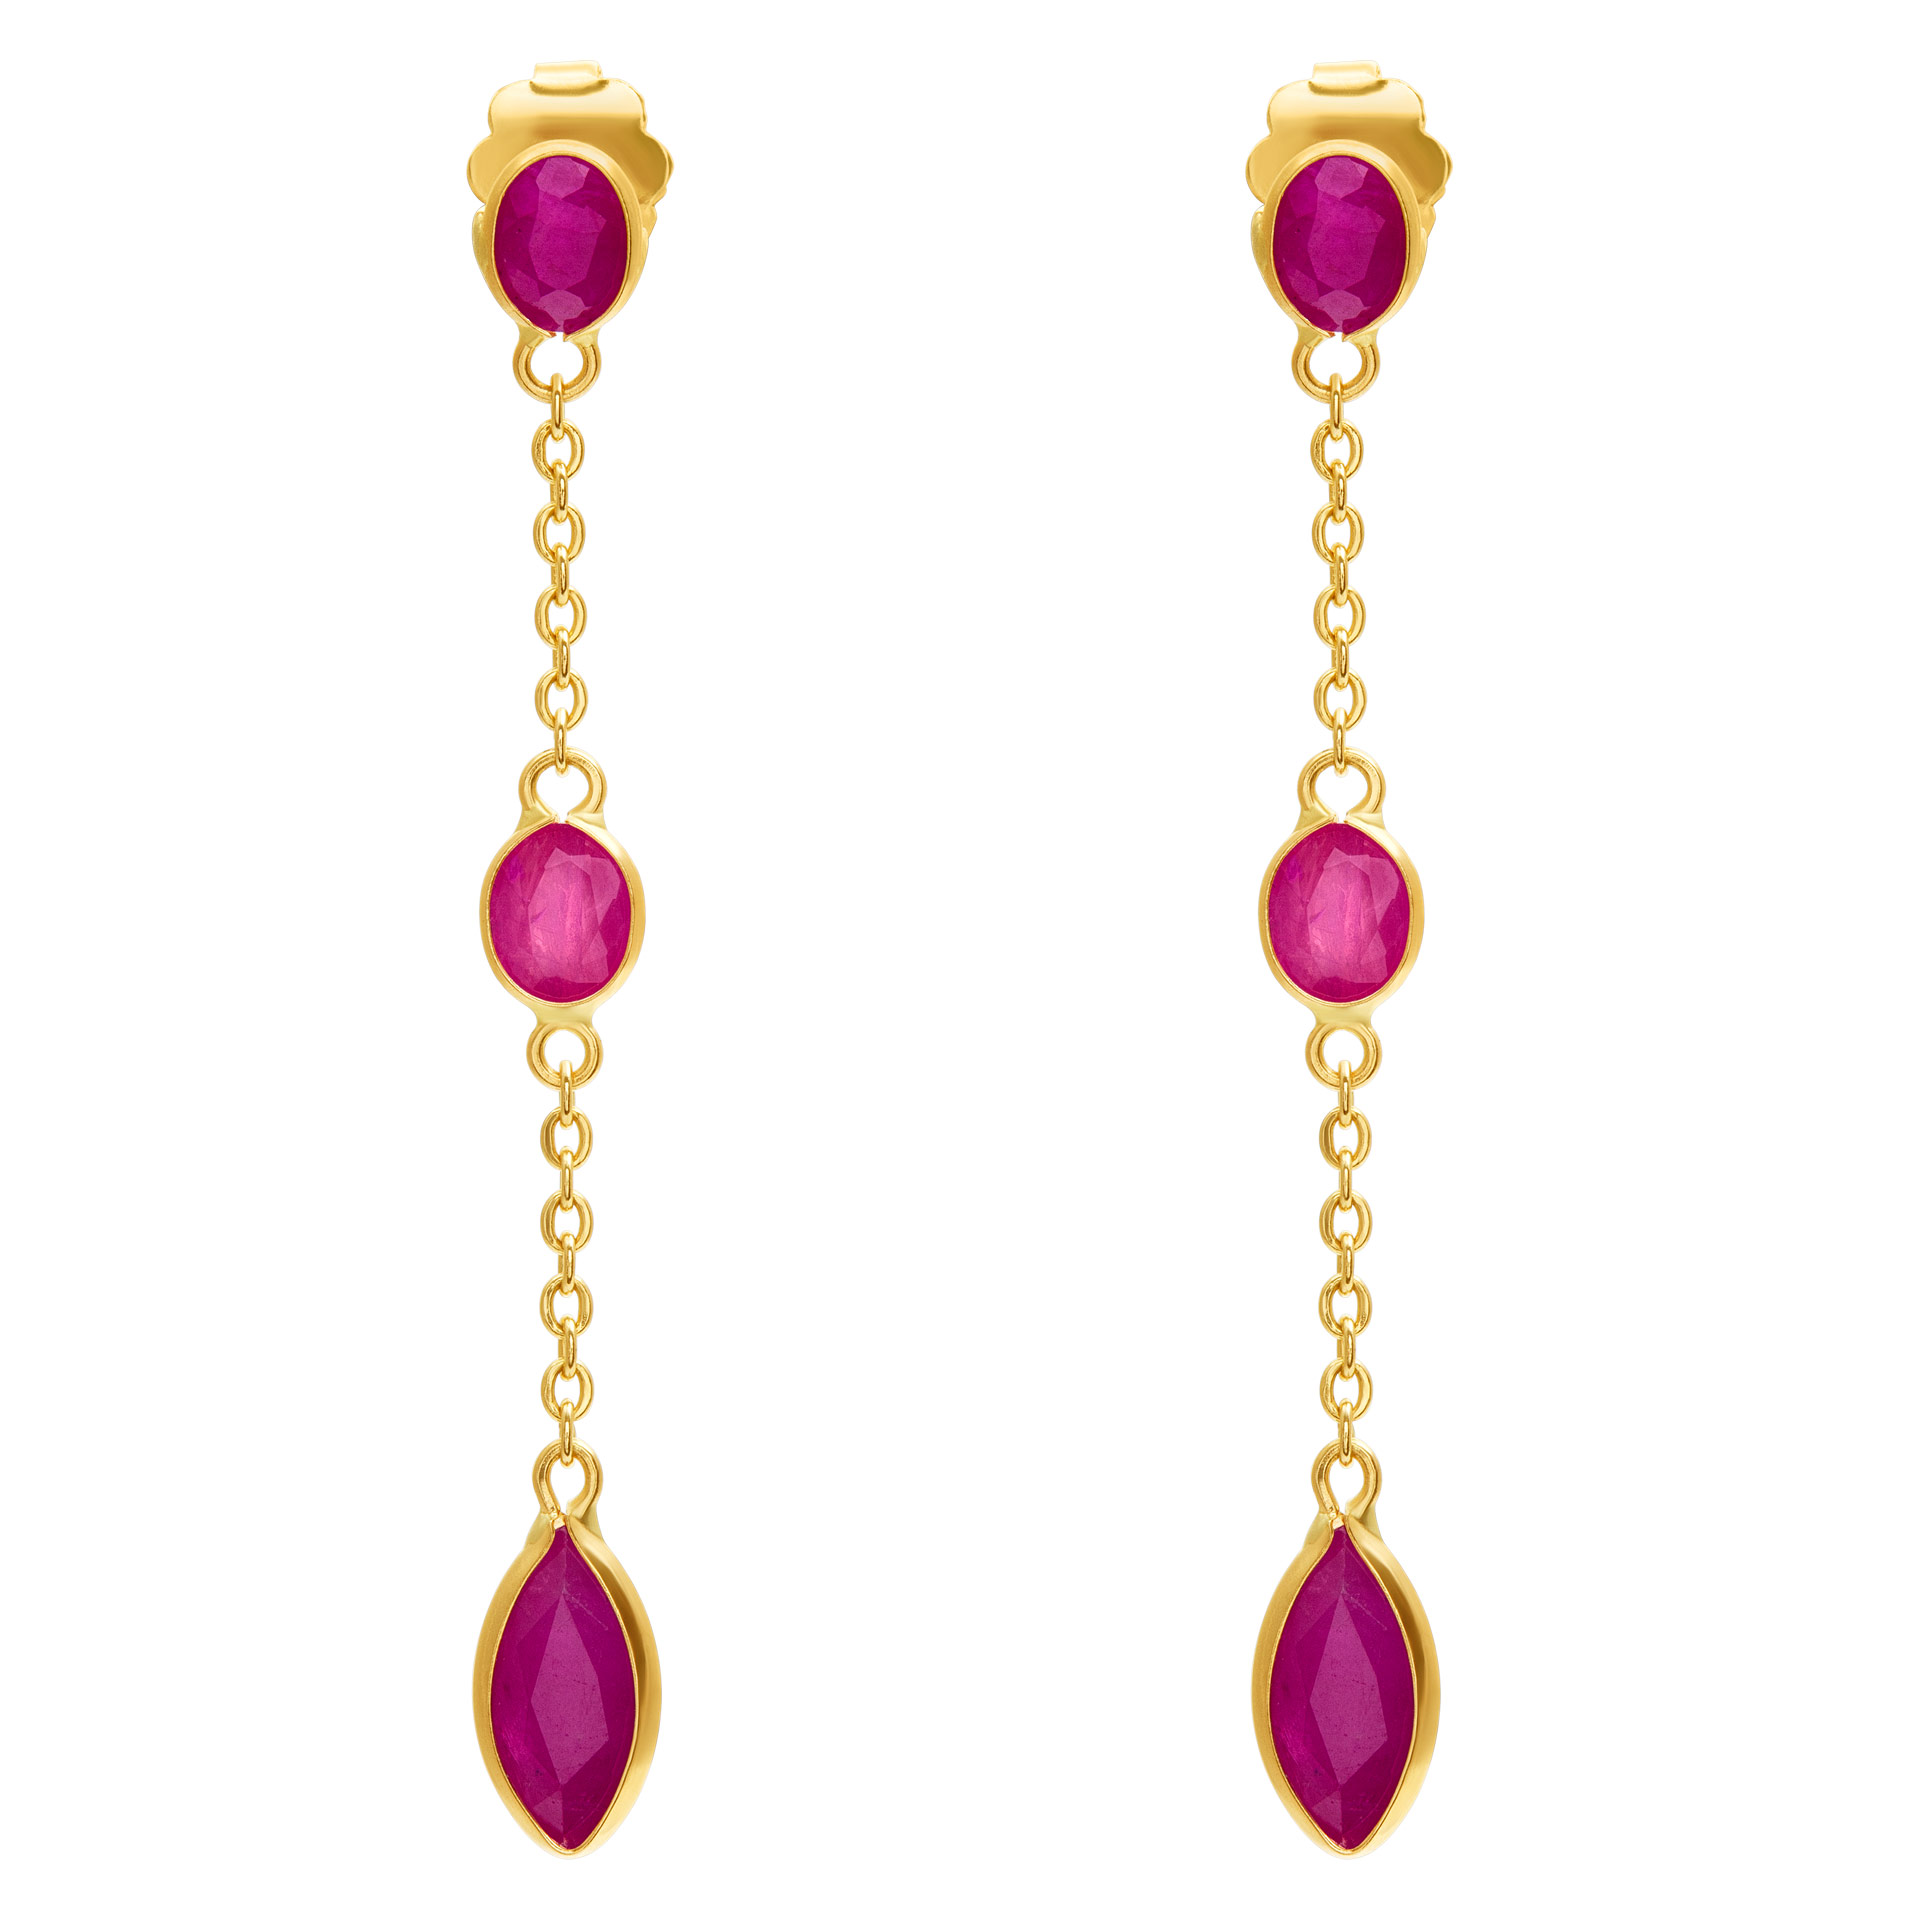 Ruby drop earrings in 14k gold with approximately 3.23cts in rubies